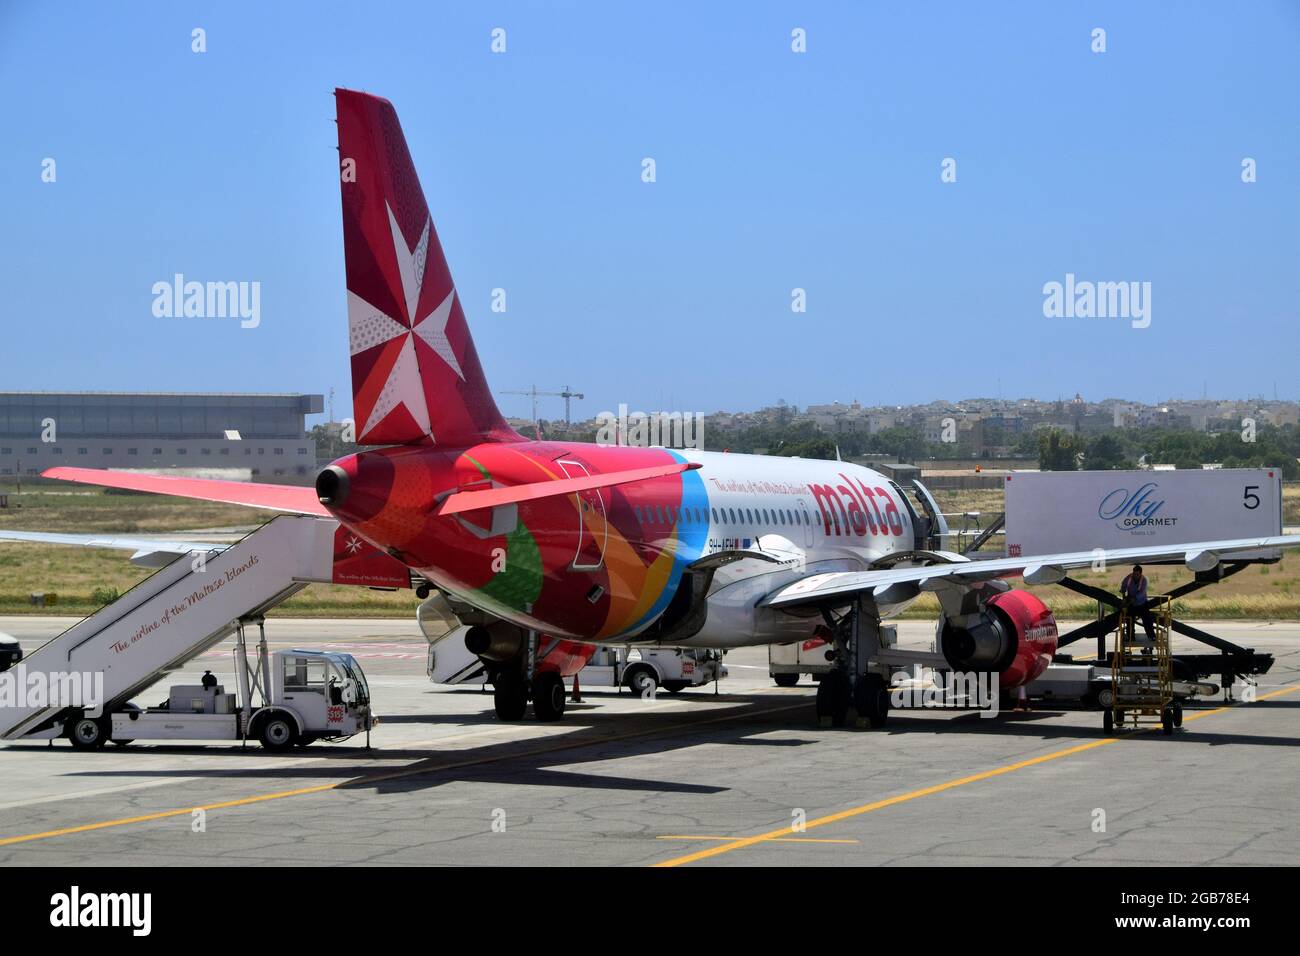 Flying Air Malta Aeroplane High Resolution Stock Photography and Images -  Alamy